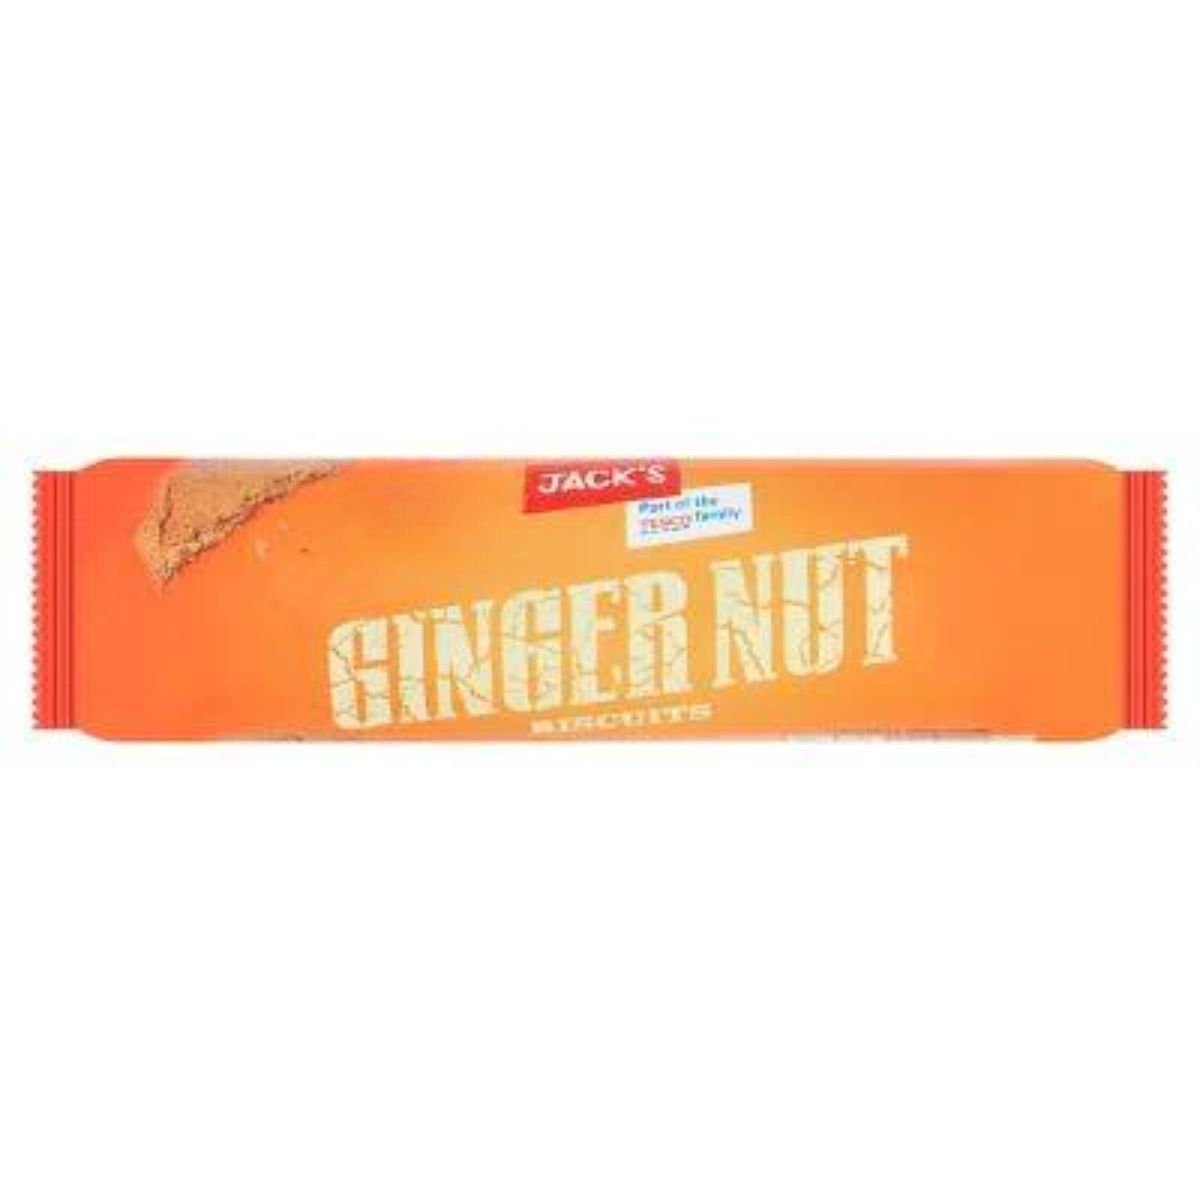 Package of Jacks - Ginger Nut Biscuit - 200g with a corner showing a broken biscuit.